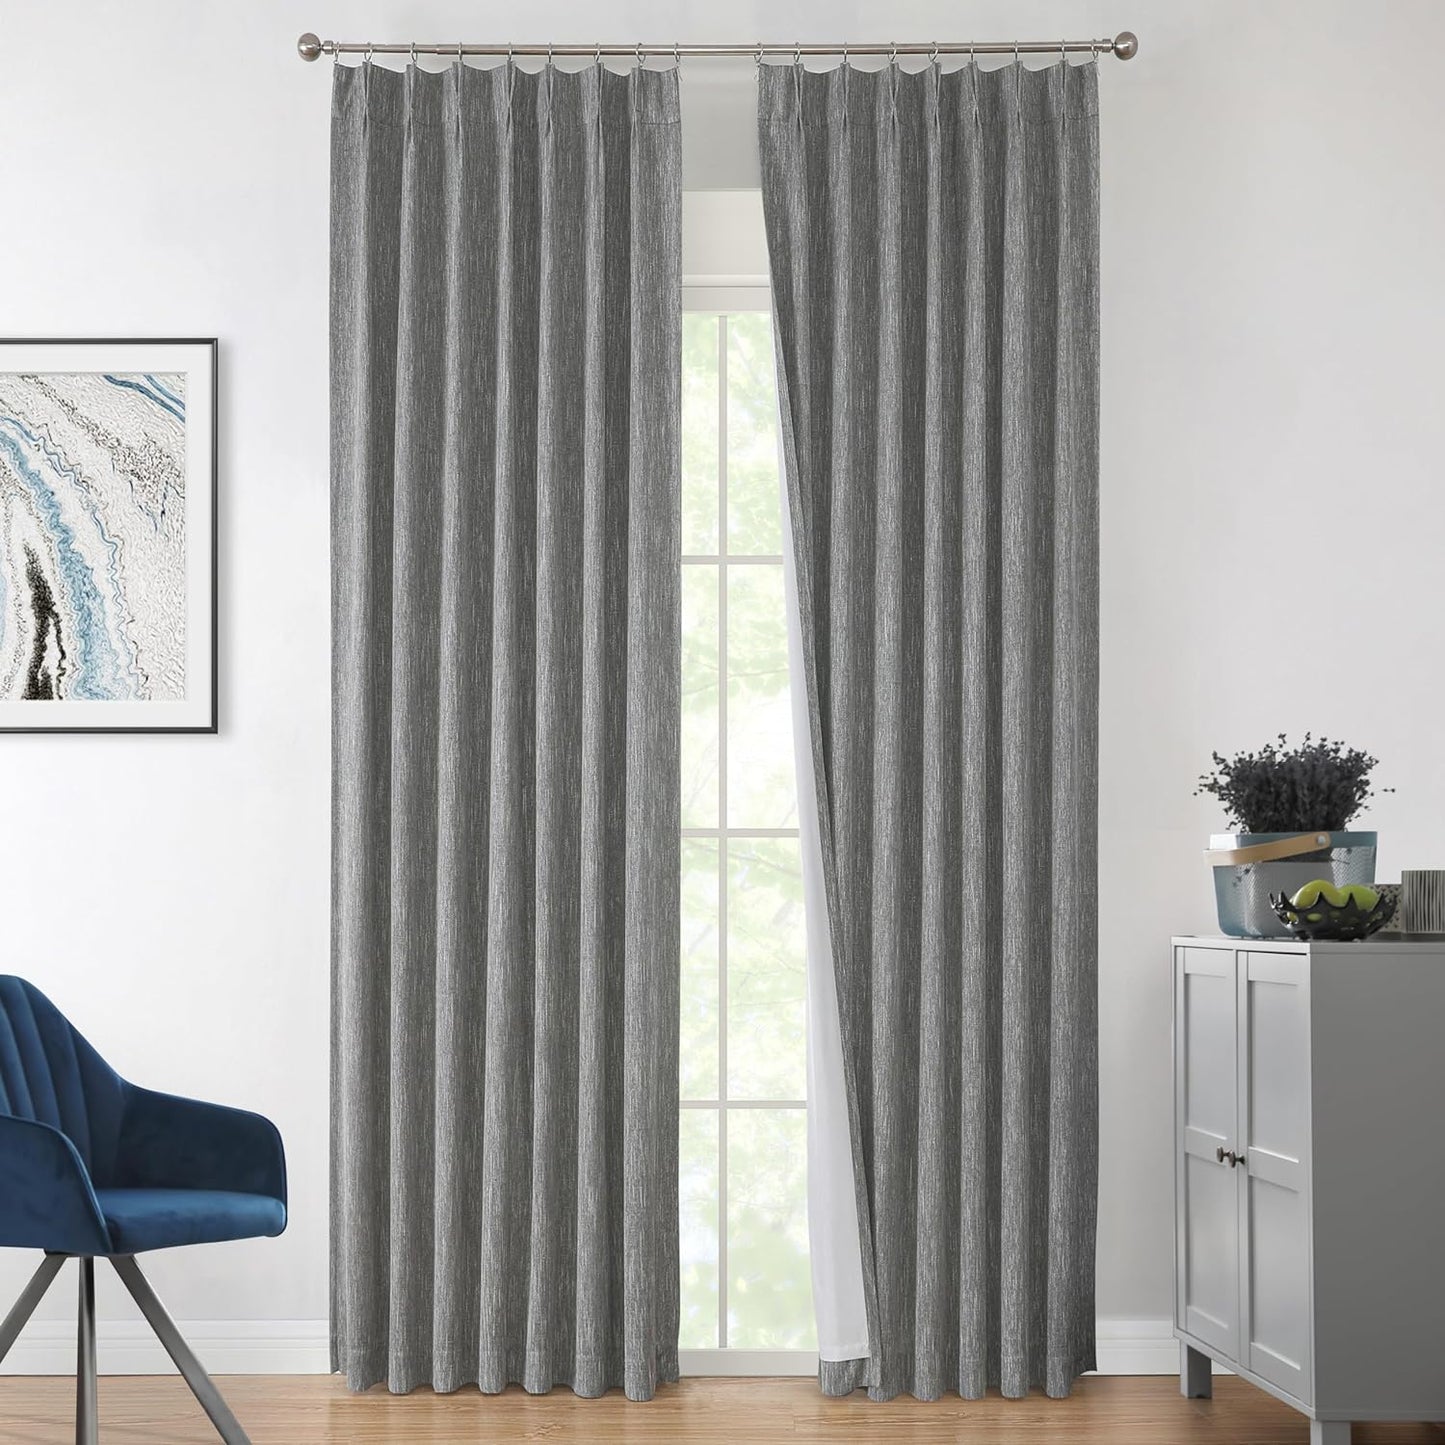 Vision Home White Pinch Pleated Full Blackout Curtains Thermal Insulated Window Curtains 84 Inch for Living Room Bedroom Room Darkening Pinch Pleat Drapes with Hooks Back Tab 2 Panel 40" Wx84 L  Vision Home Charcoal Grey 40"X120"X2 